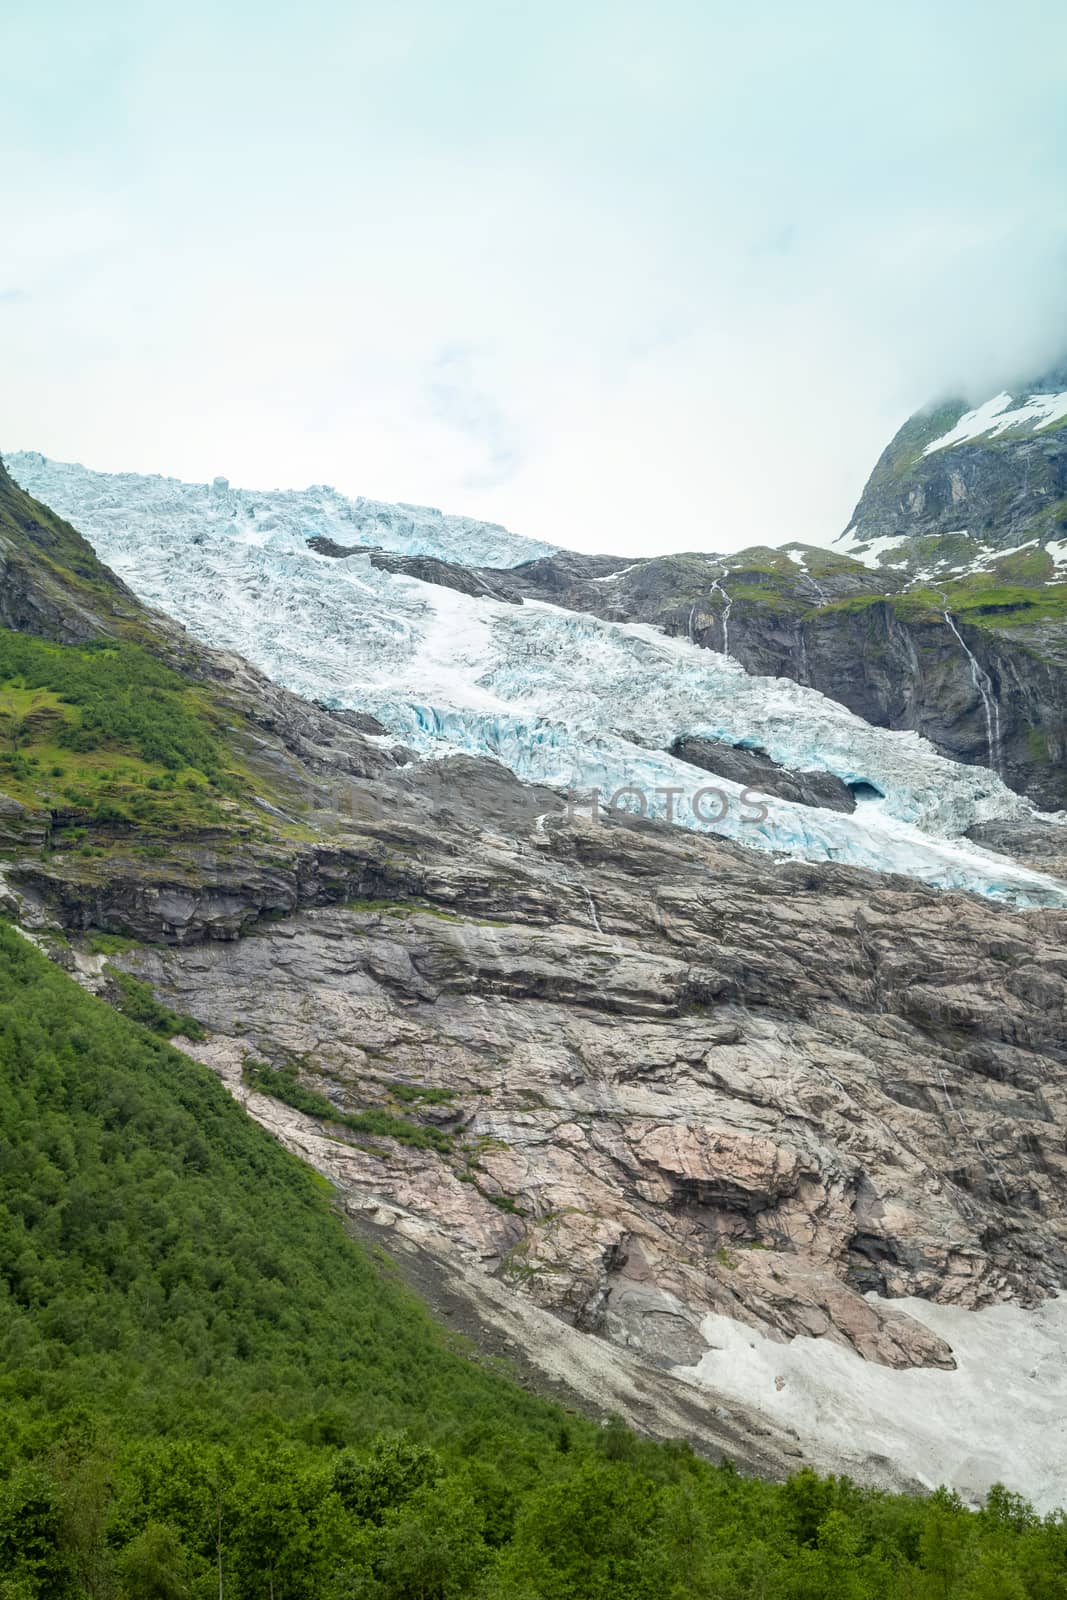 Melting Briksdal glacier in Norway - is one of the most accessible and best known arms of the Jostedalsbreen glacier.